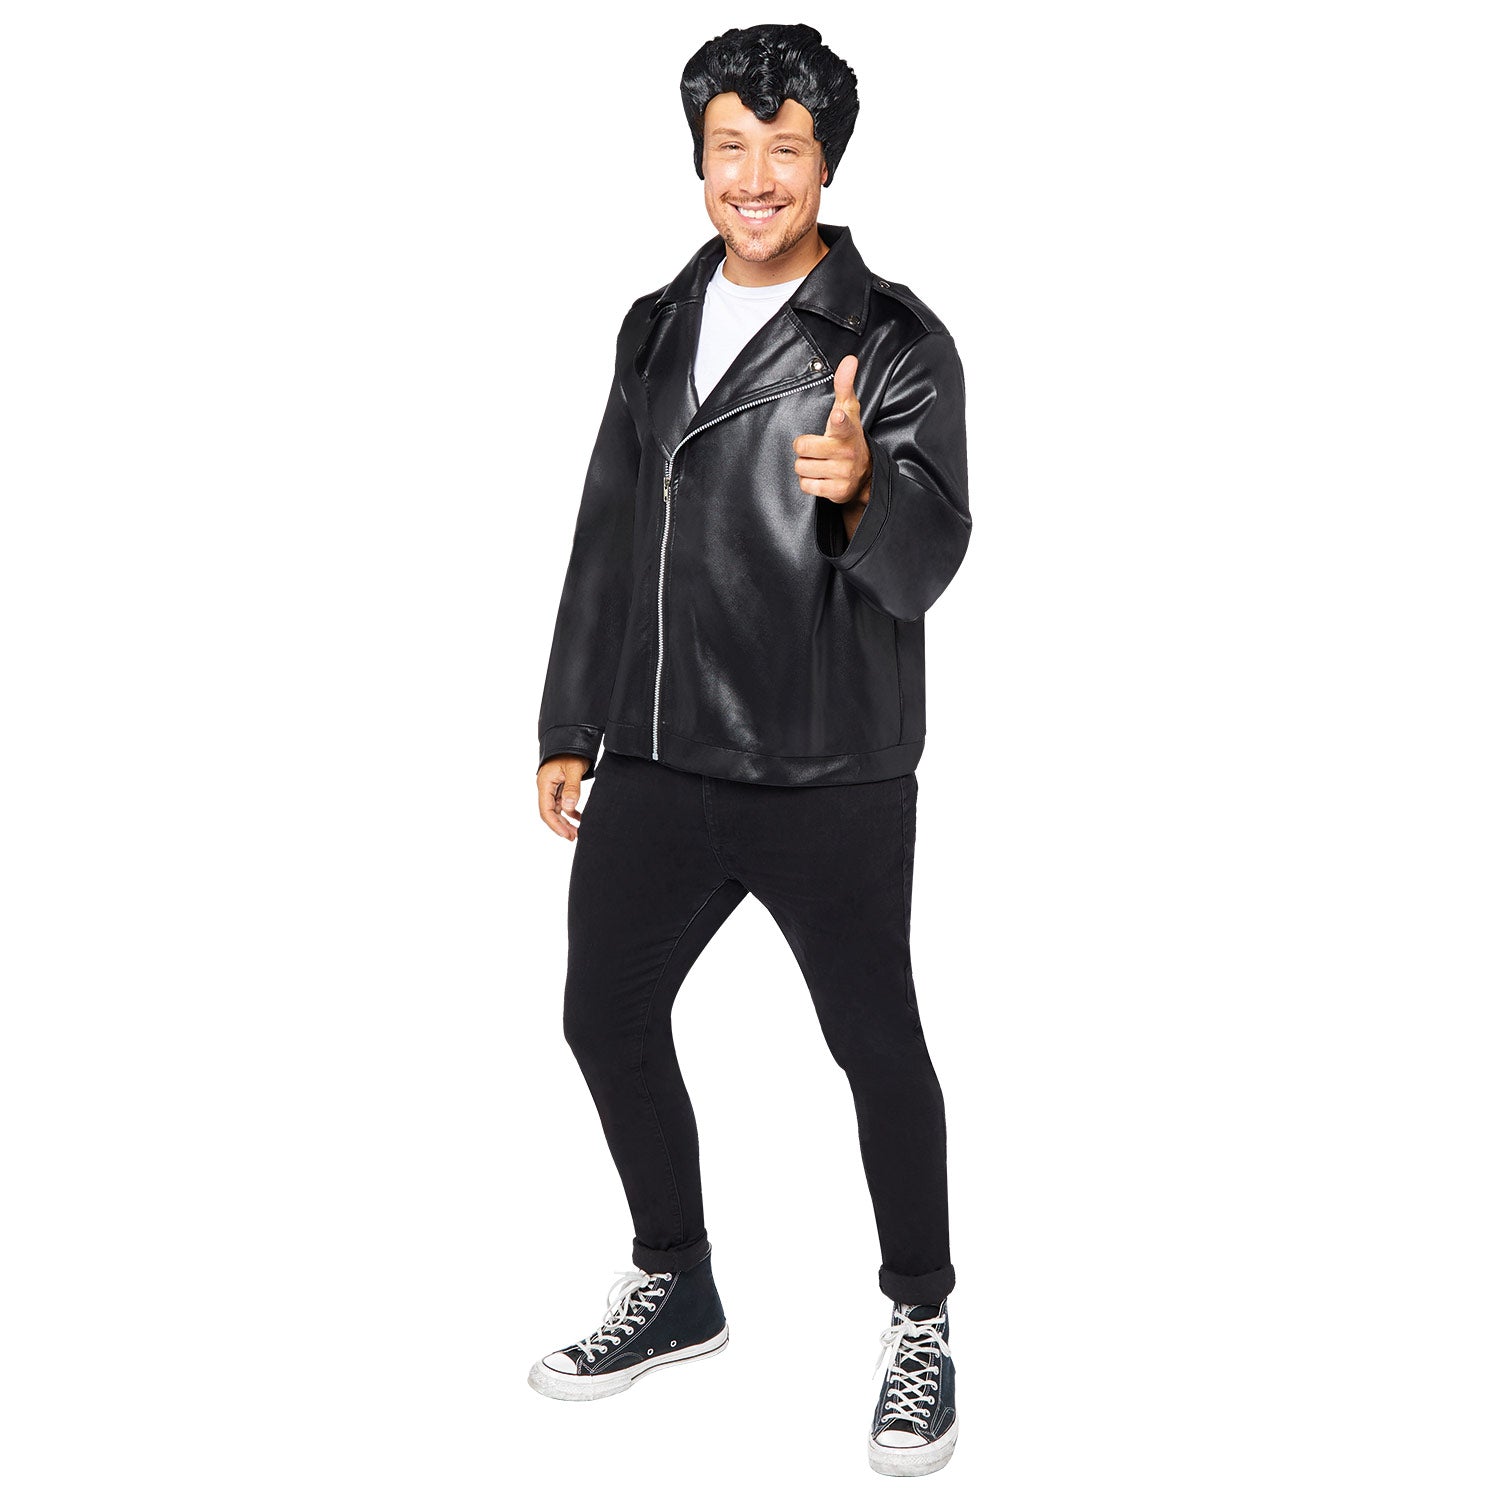 Costume Grease T-Bird Jacket - Adult